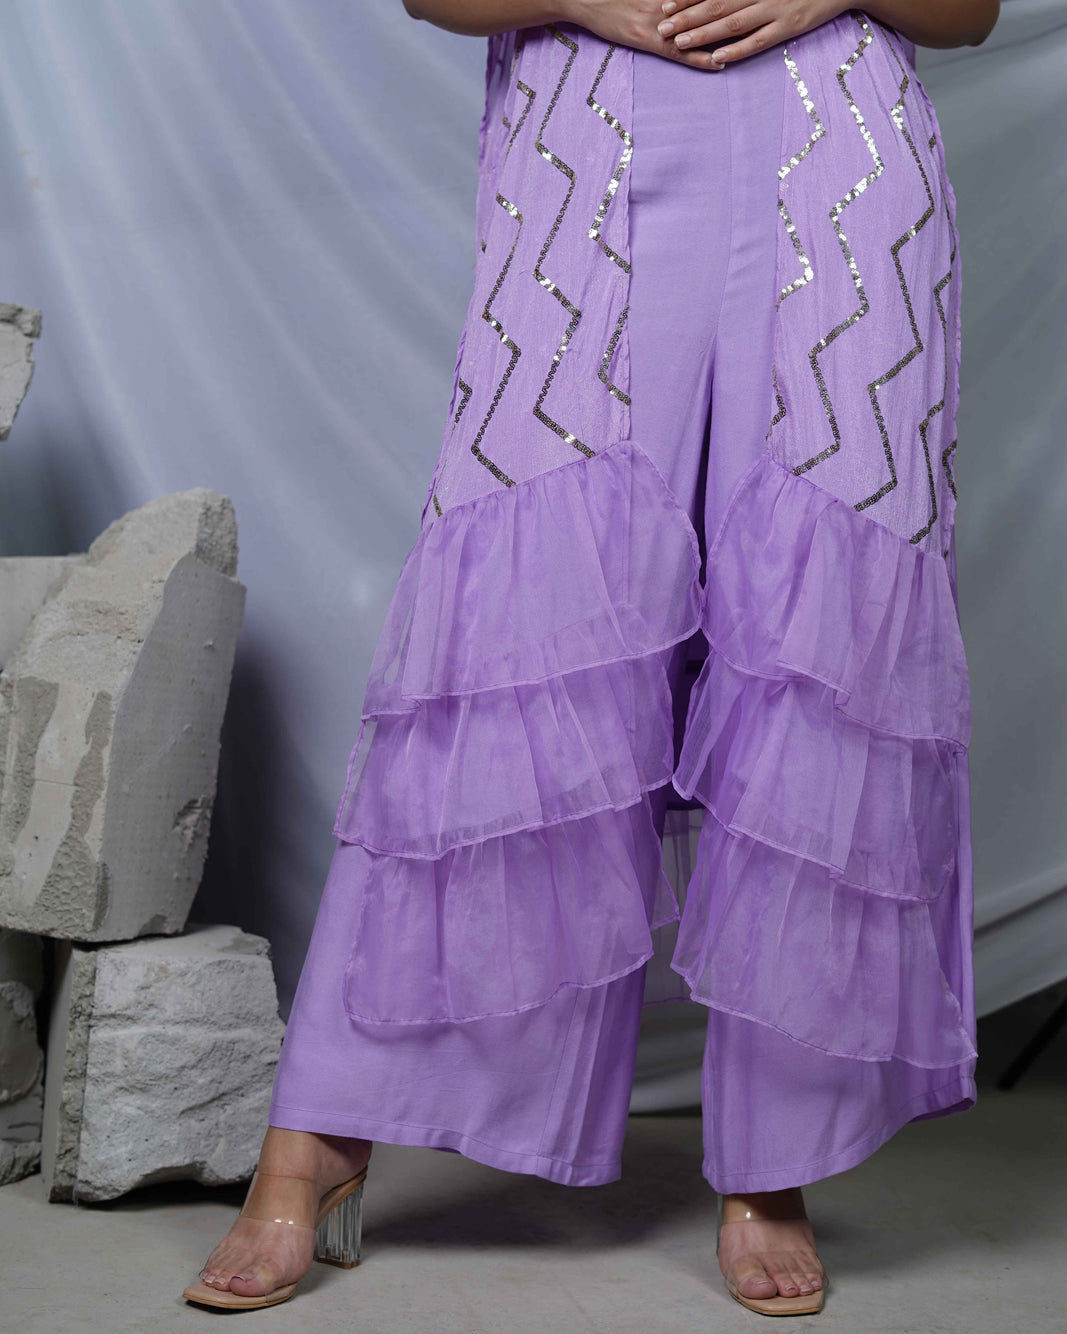 Chandani Lavender Party Indo-Western Co-ord Set For Women with Cape and Frill Details